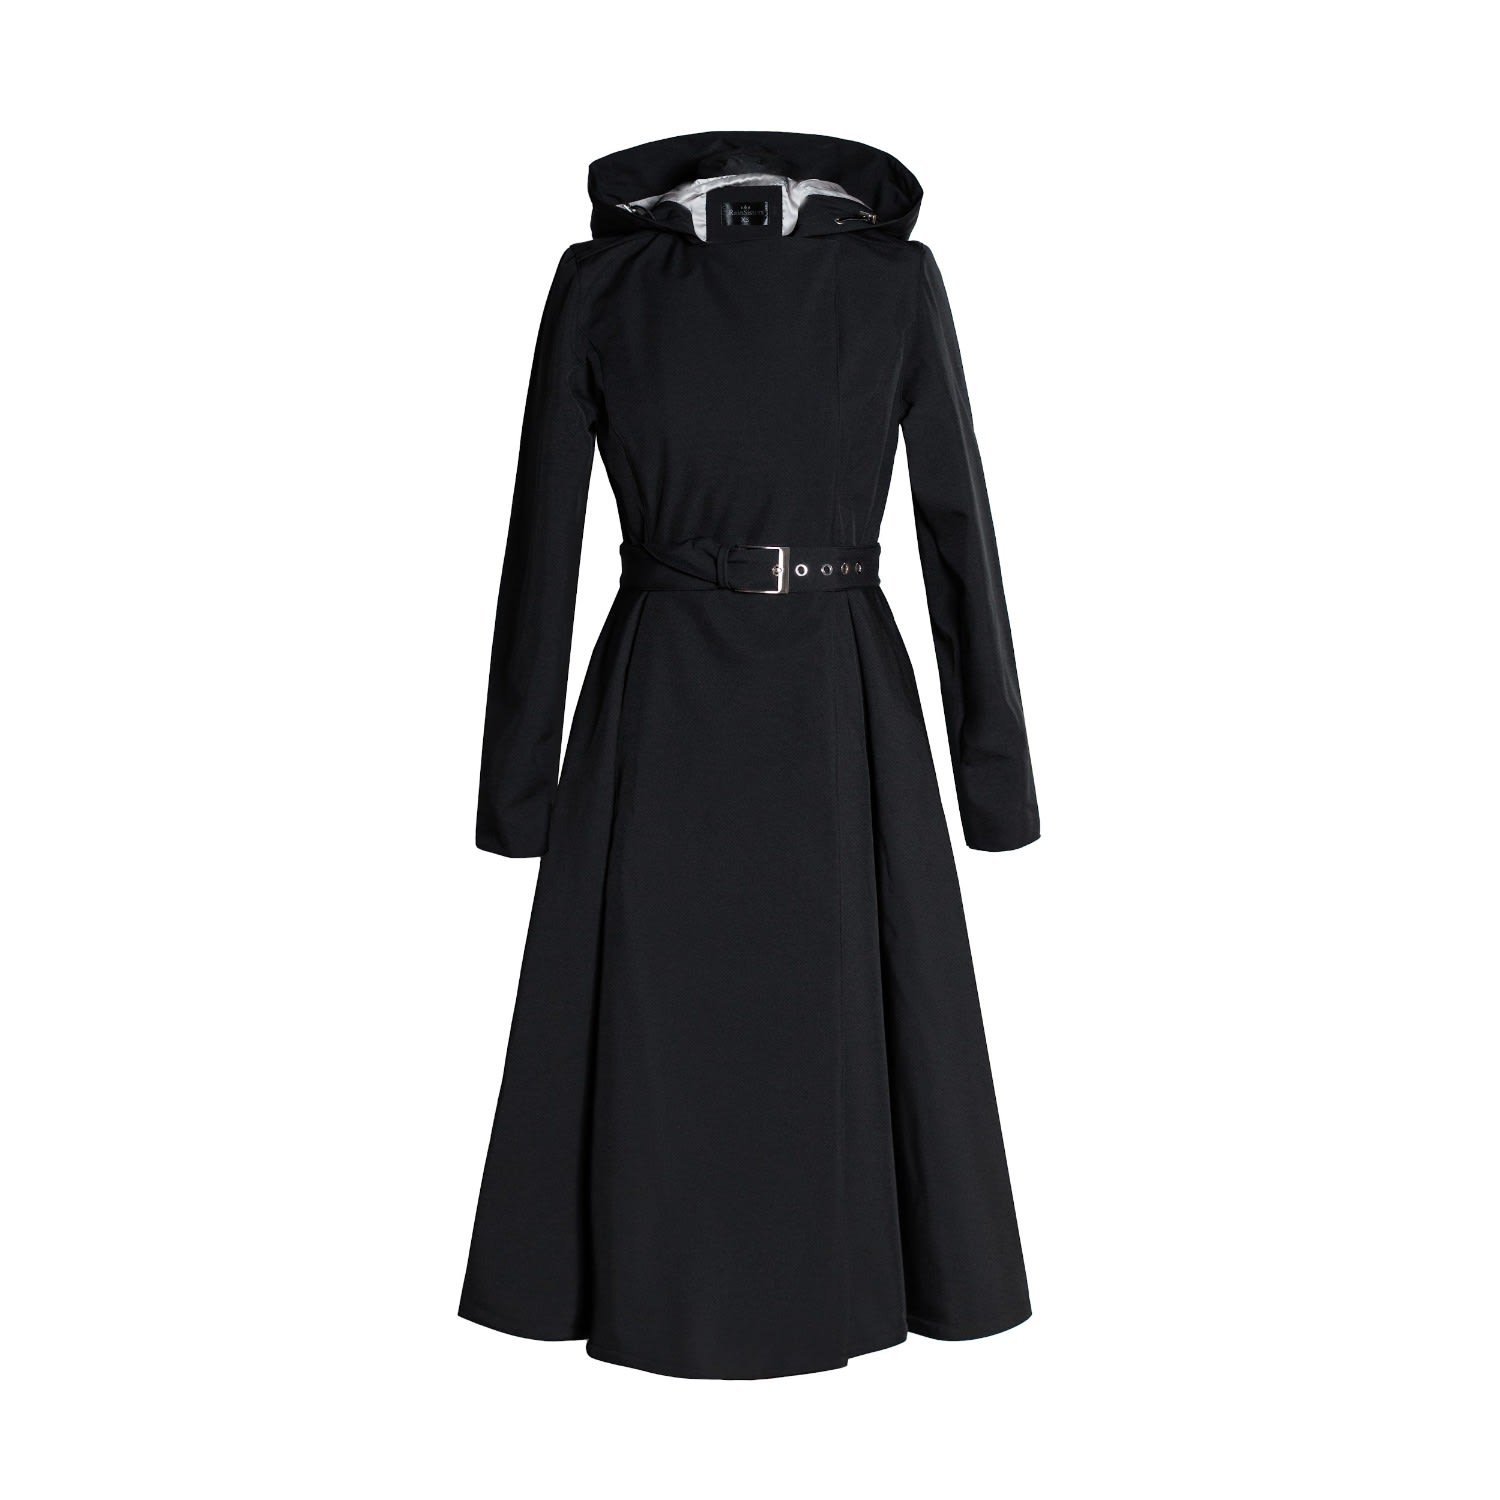 Women’s Double Breasted Coat With Belt In Black: Queen Of Spades Extra Small Rainsisters